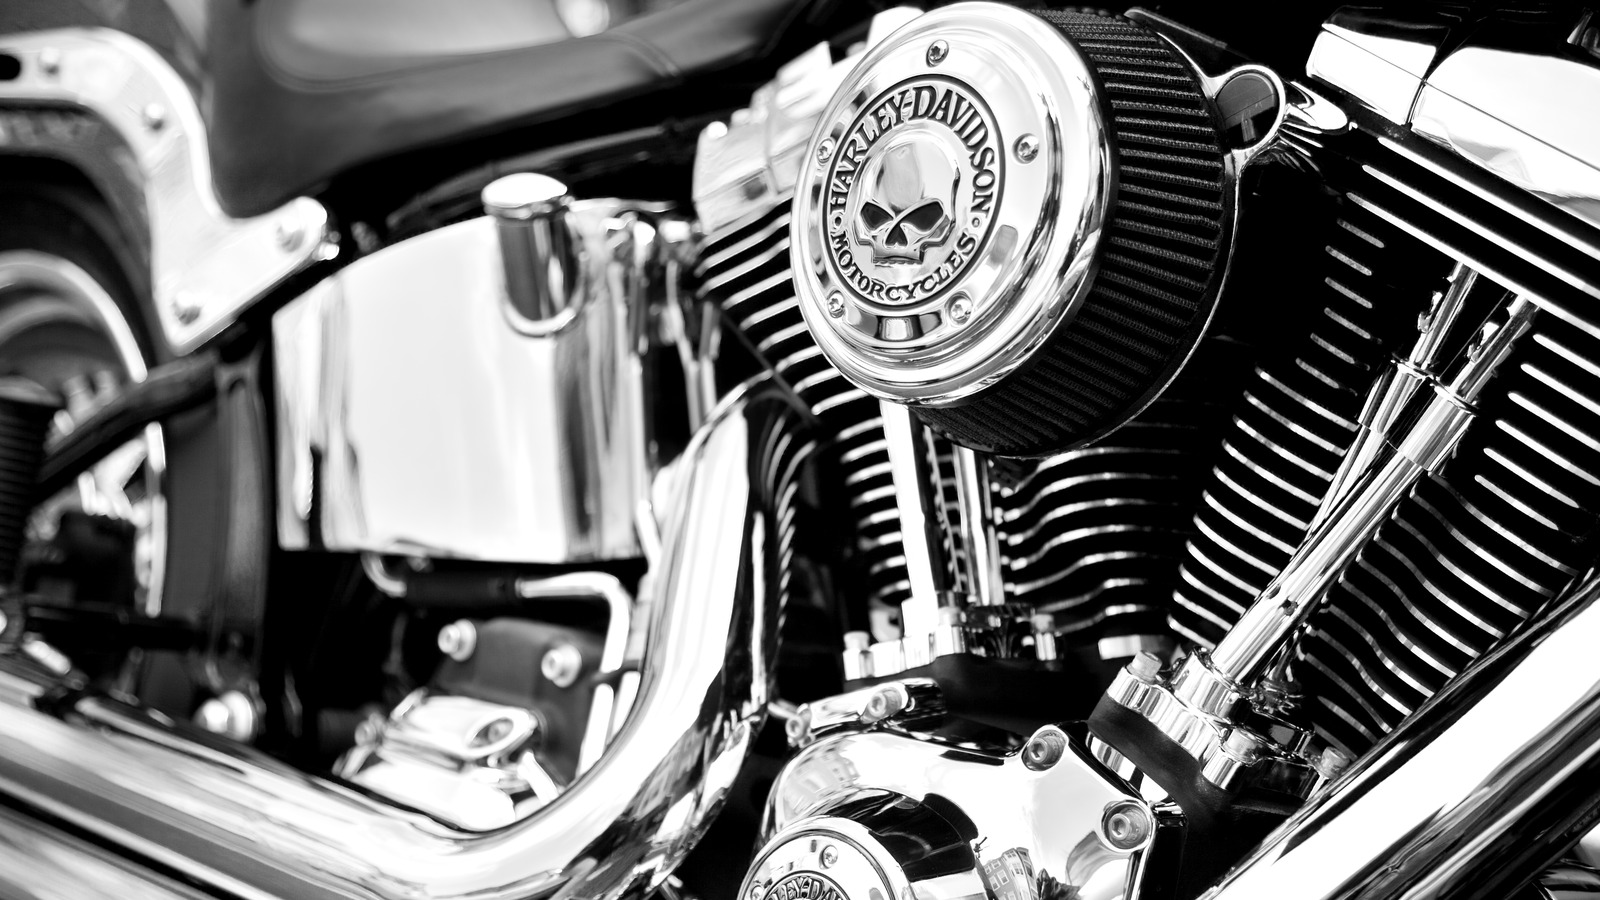 Air Cooled Vs. Liquid Cooled Motorcycle Engines: The Pros And Cons Of Each